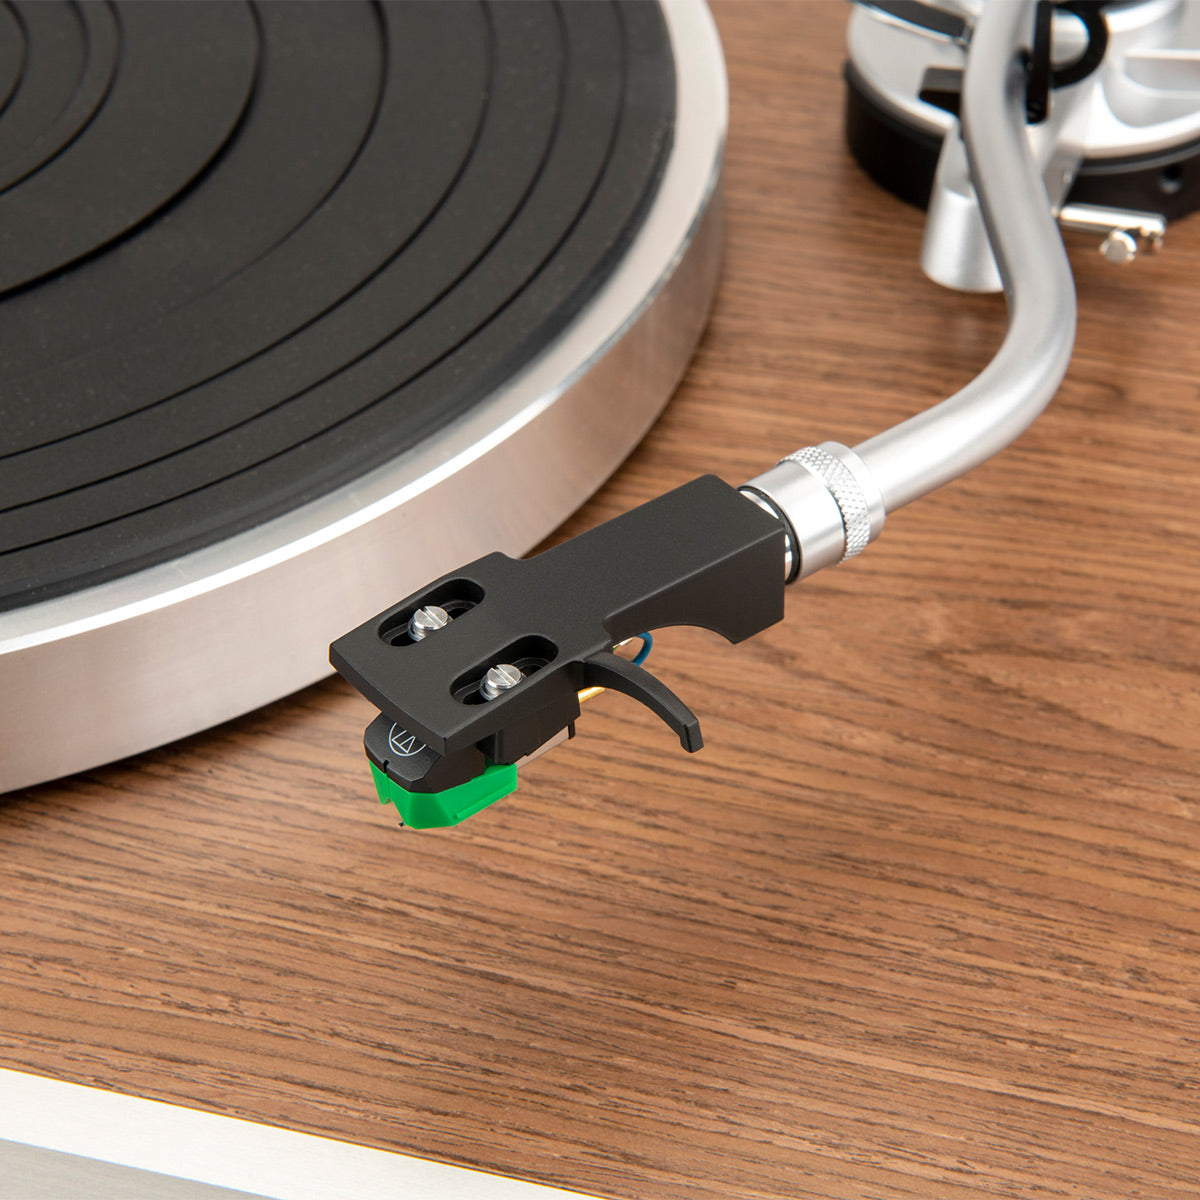 Sony PS-LX310BT Automatic Turntable Overview by TurntableLab.com 